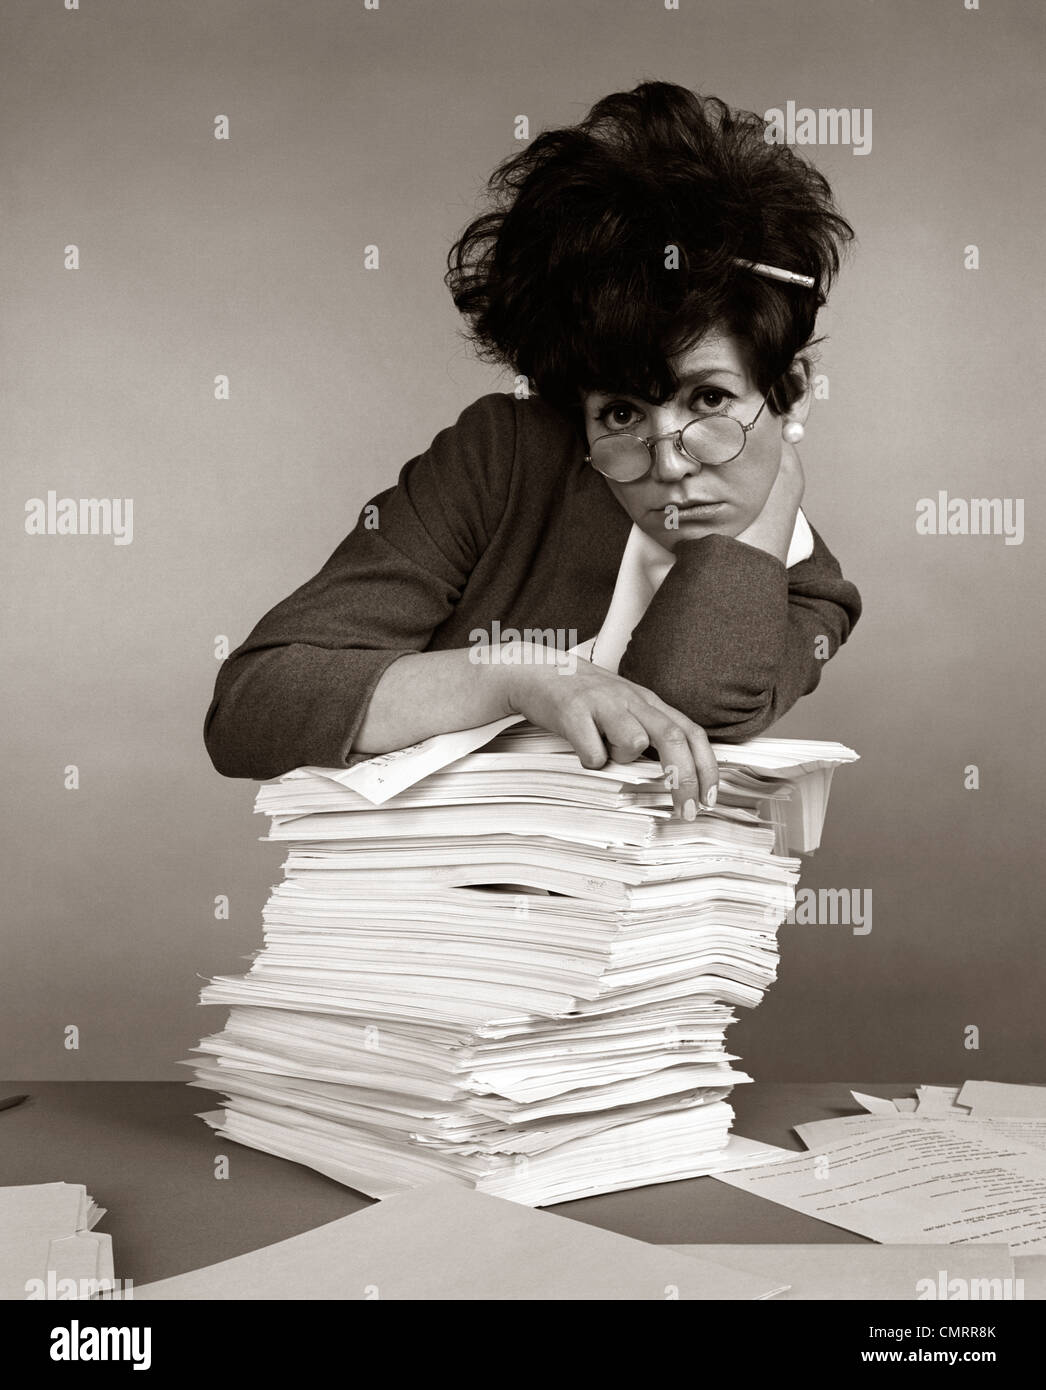 1960s 1970s WOMAN SECRETARY PENCIL STUCK IN TEASED HAIR OVERWORKED EXPRESSION LEANING PILE PAPERWORK Stock Photo